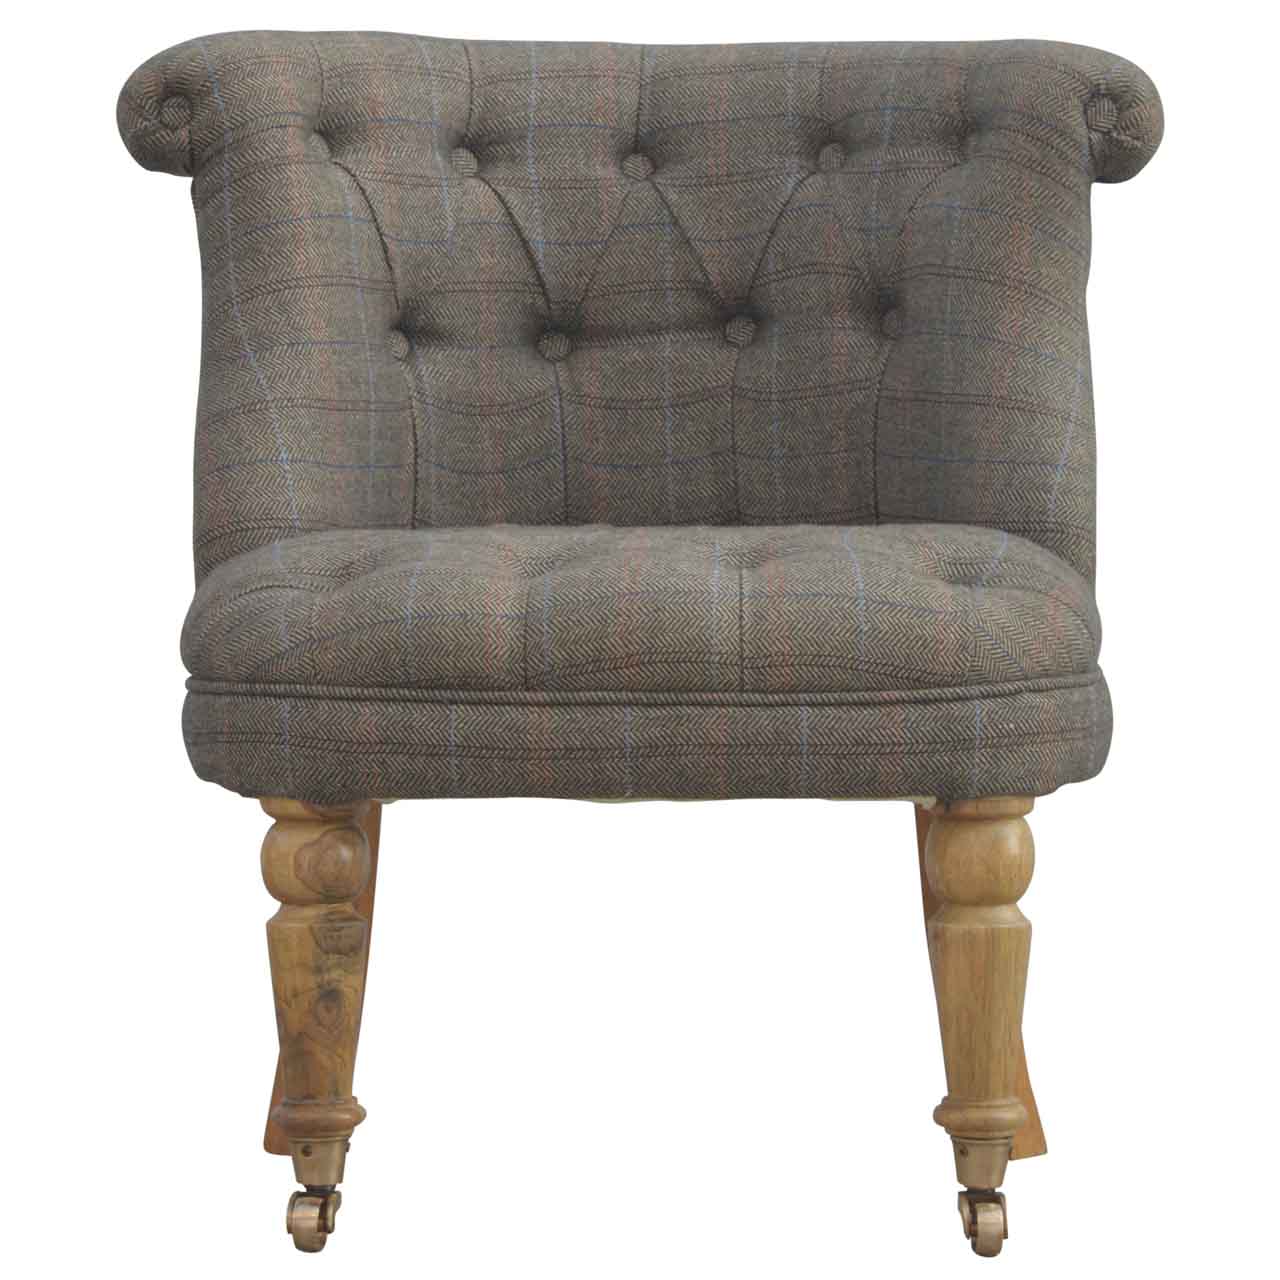 View Small Multi Tweed Accent Chair information